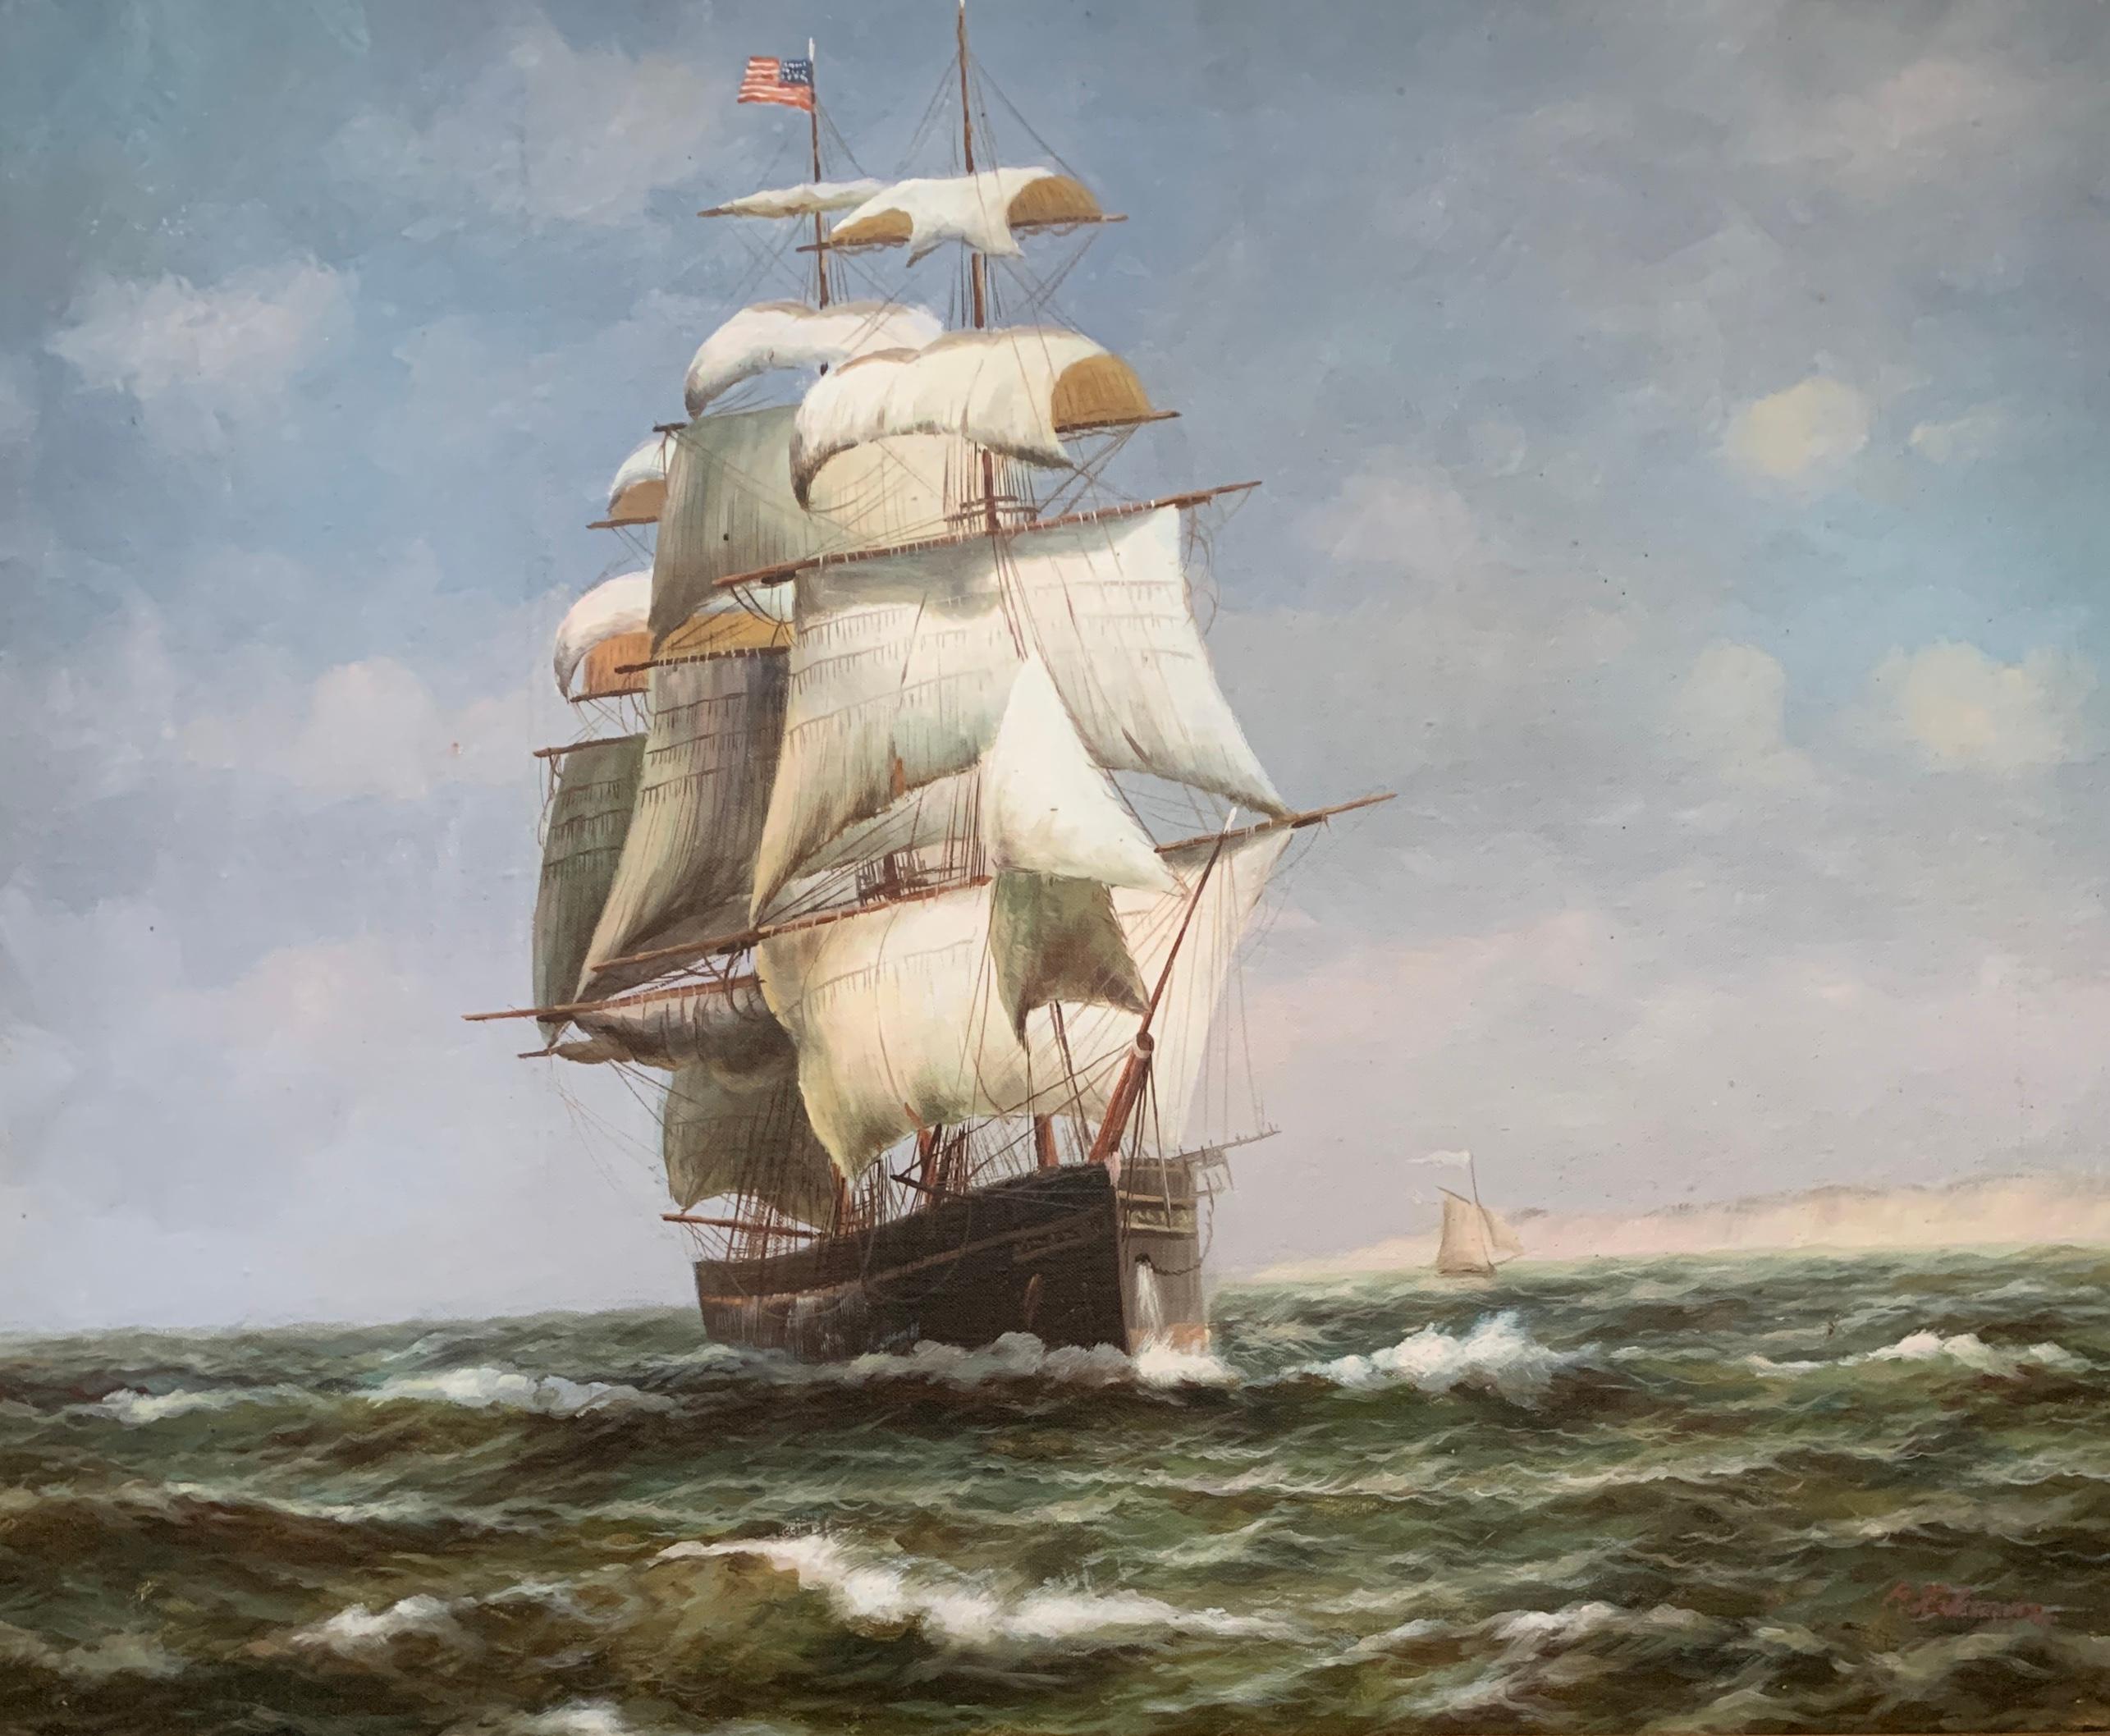 19th century style American tea clipper-sailboat at sea with a landscape beyond. - Painting by P.J.Levin